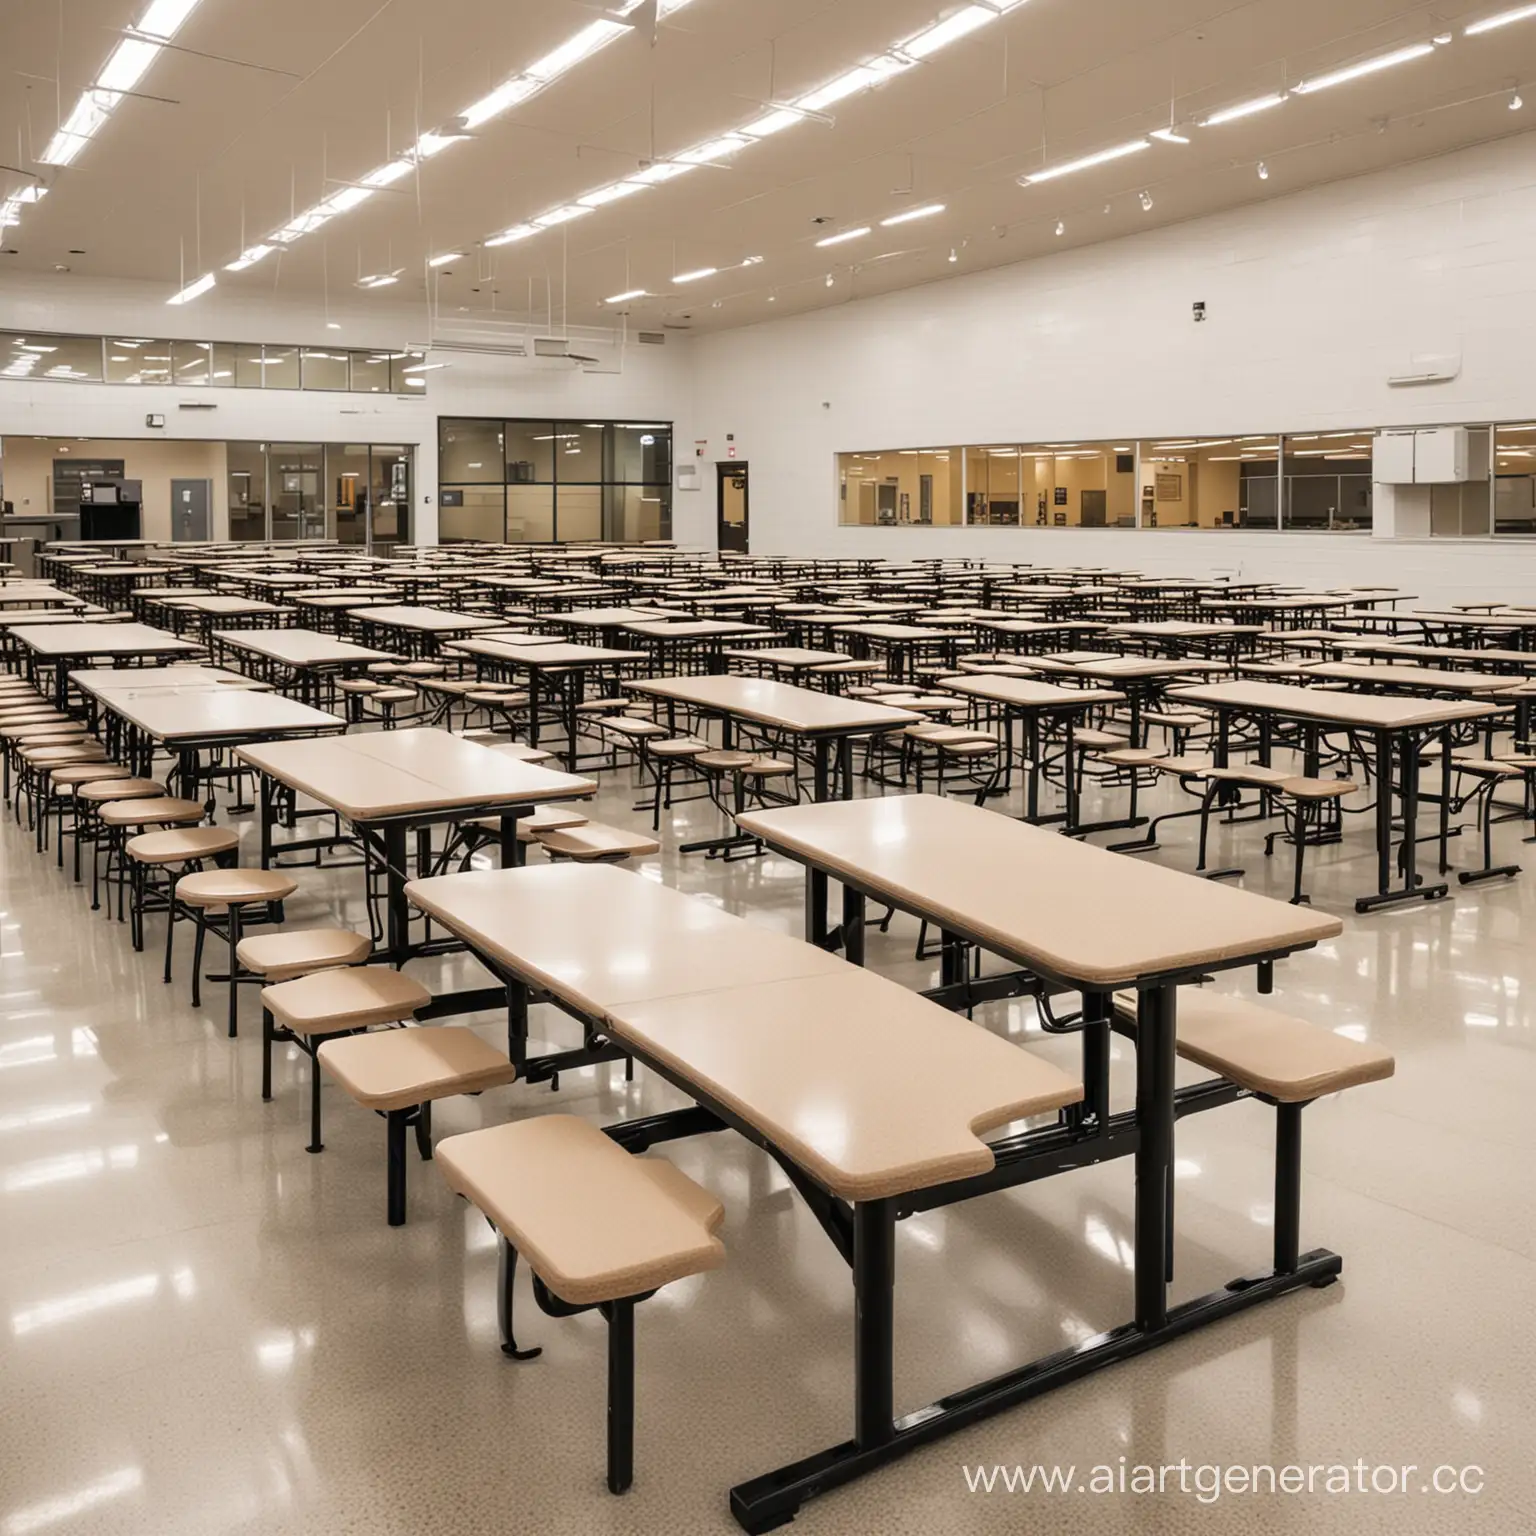 Vibrant-School-Cafeteria-Dream-with-Diverse-Food-Choices-and-Happy-Students